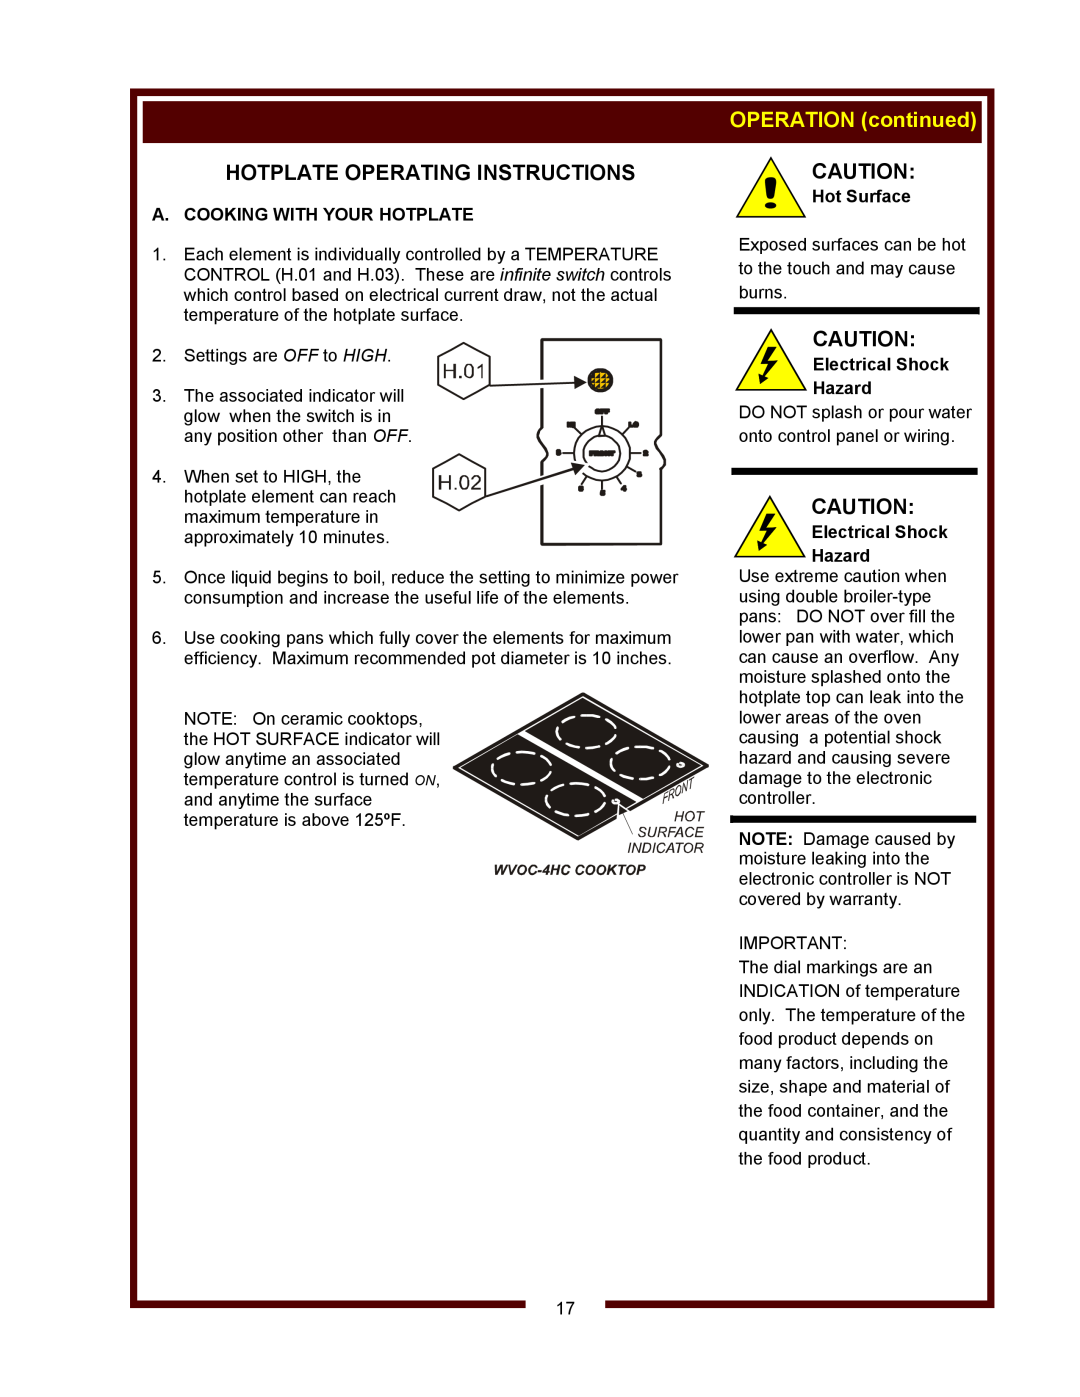 Wells WVOC-4HC, WVOC-4HS Hotplate Operating Instructions, OPERATION continued, A. Cooking With Your Hotplate, Hot Surface 